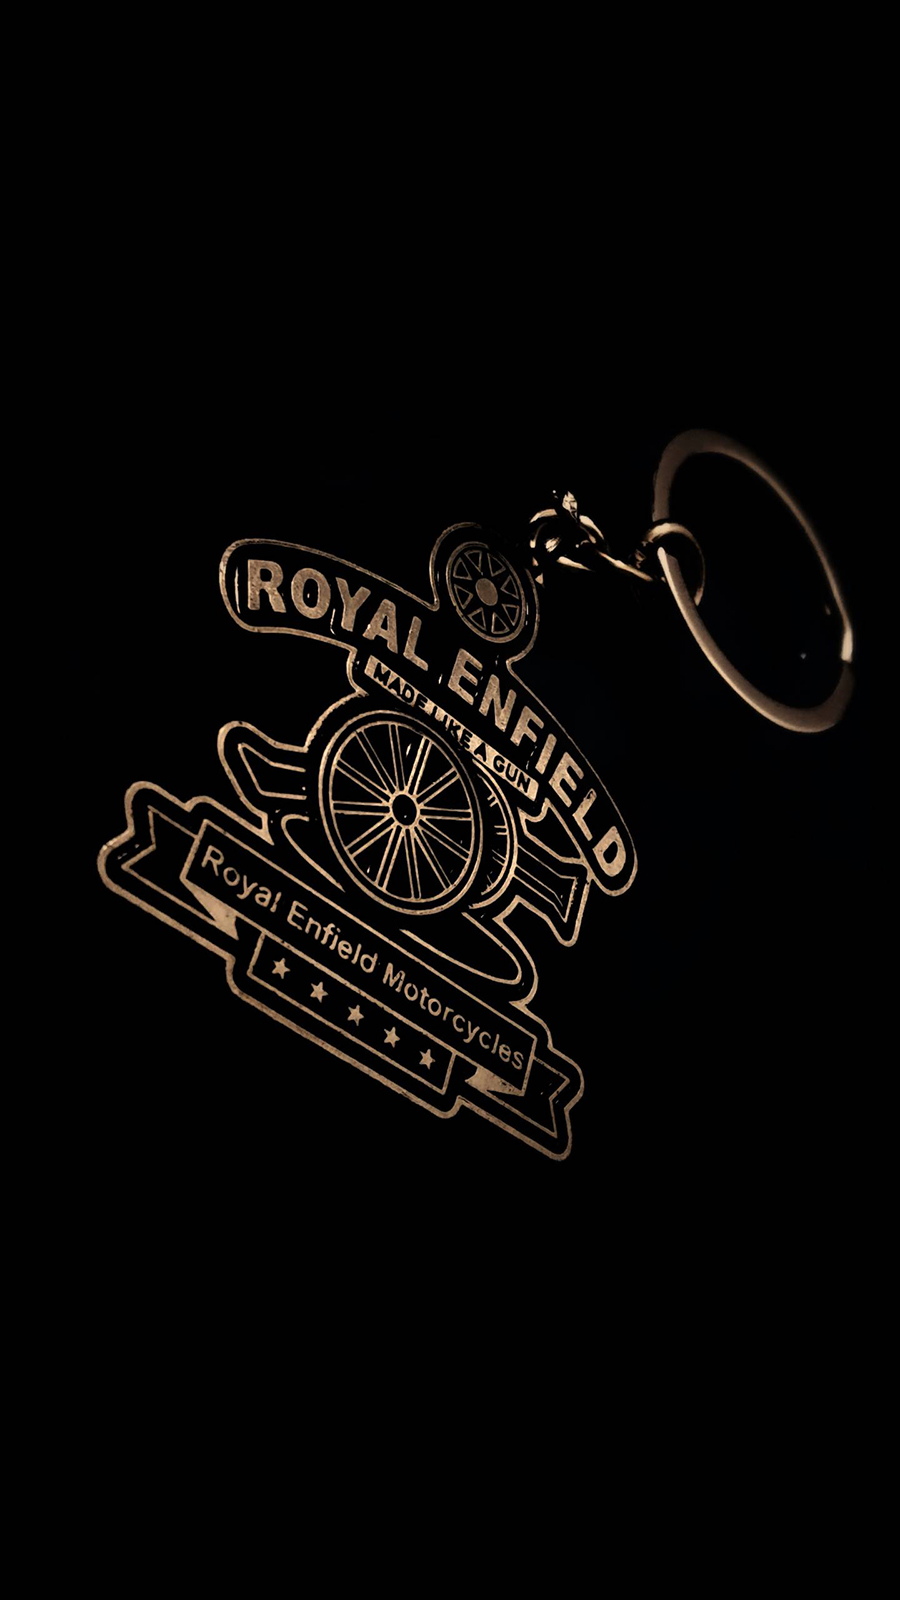 Royal Enfield Free Wallpapers Now Download (2) - Best Wallpapers